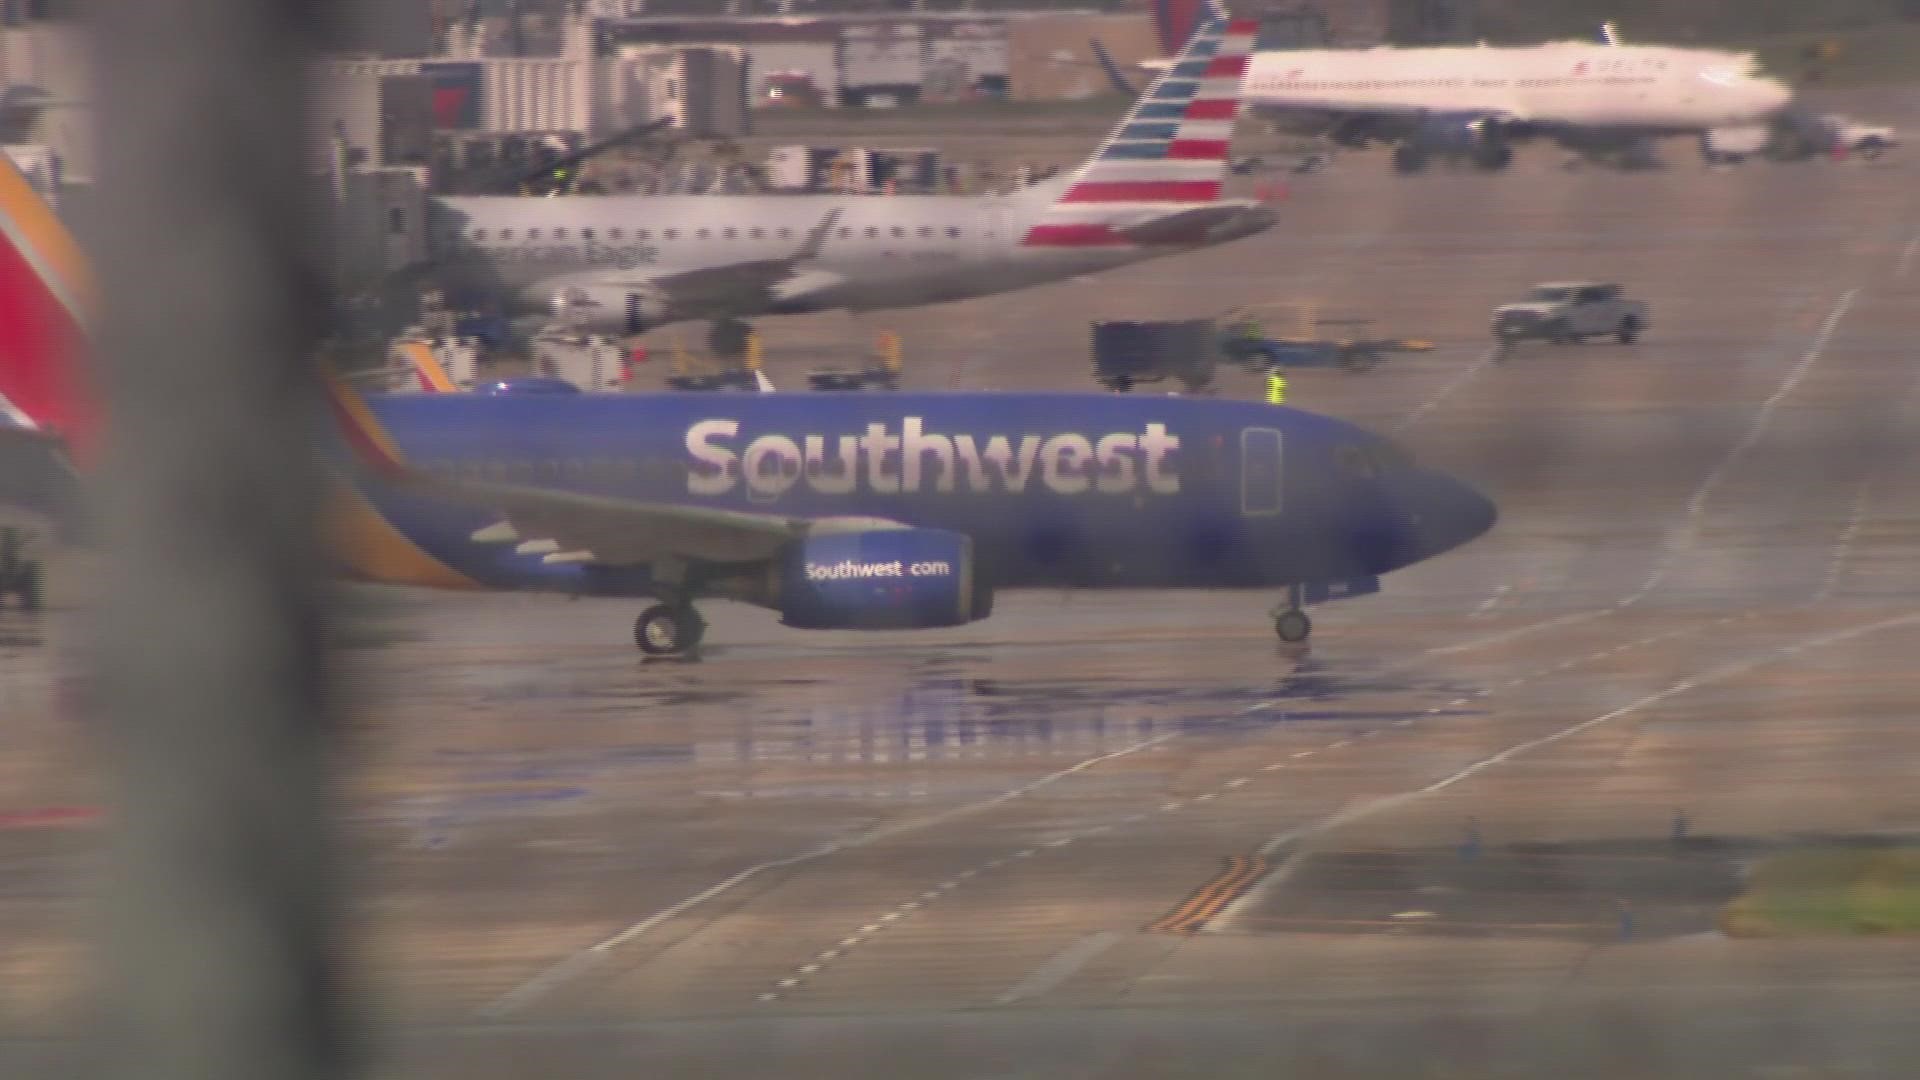 So far Monday, Southwest has canceled 22 flights at Lambert, and more than 50 were delayed.